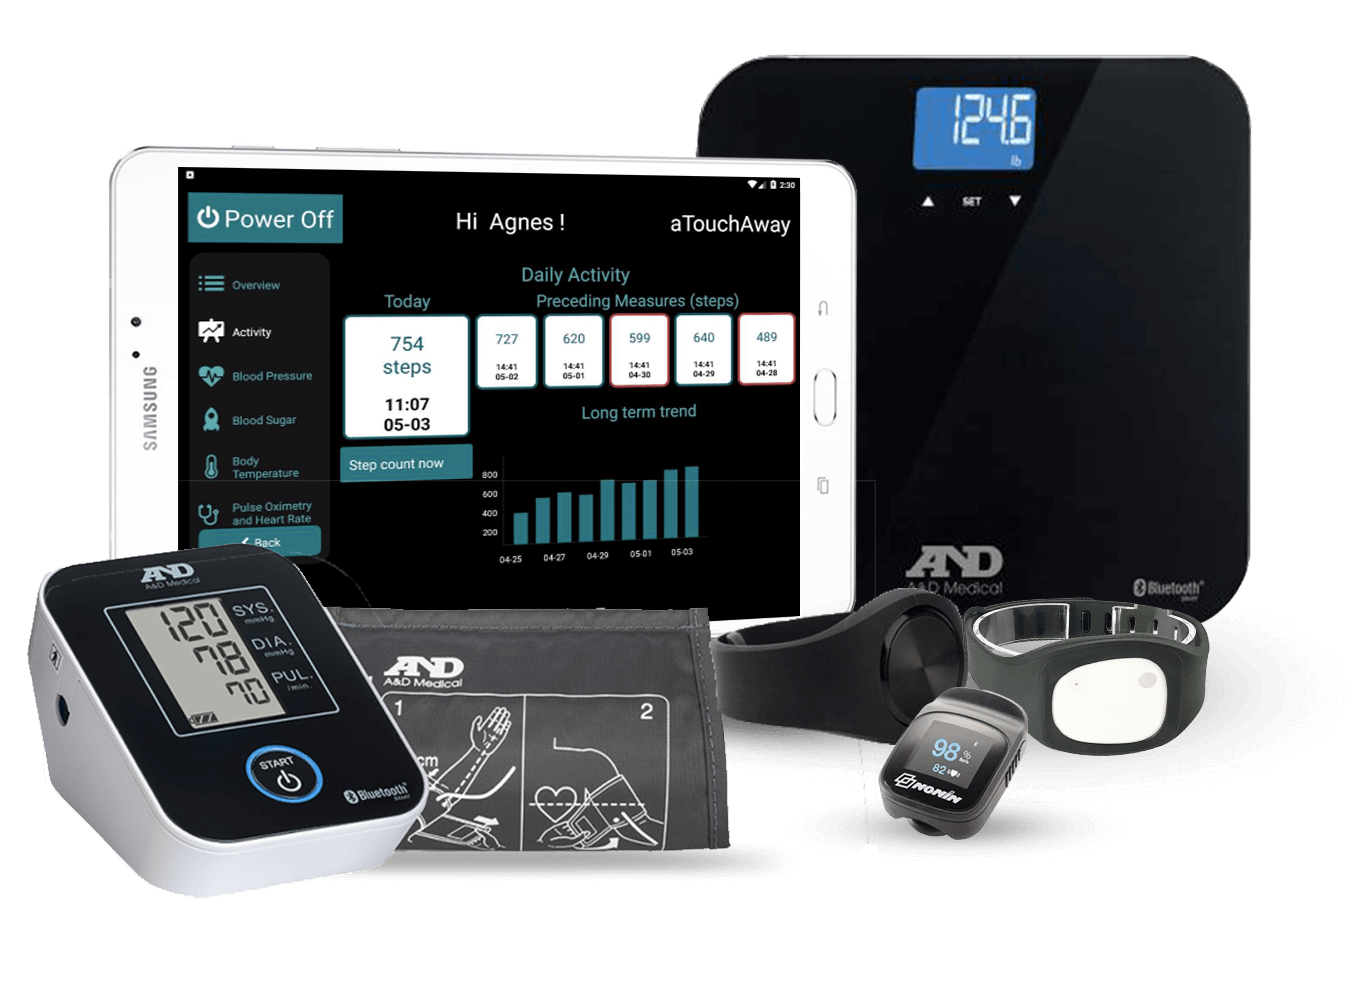 Patients can measure and share their health indicators without leaving their own living room.
aTouchAway is able to acquire, track, and report data from devices measuring the following Vital Health Indicators :  Oxygen Saturation Levels
Heart / Pulse Rate
Blood Pressure
Blood Glucose
Body Temperature
Weight
Activity / Step Counting